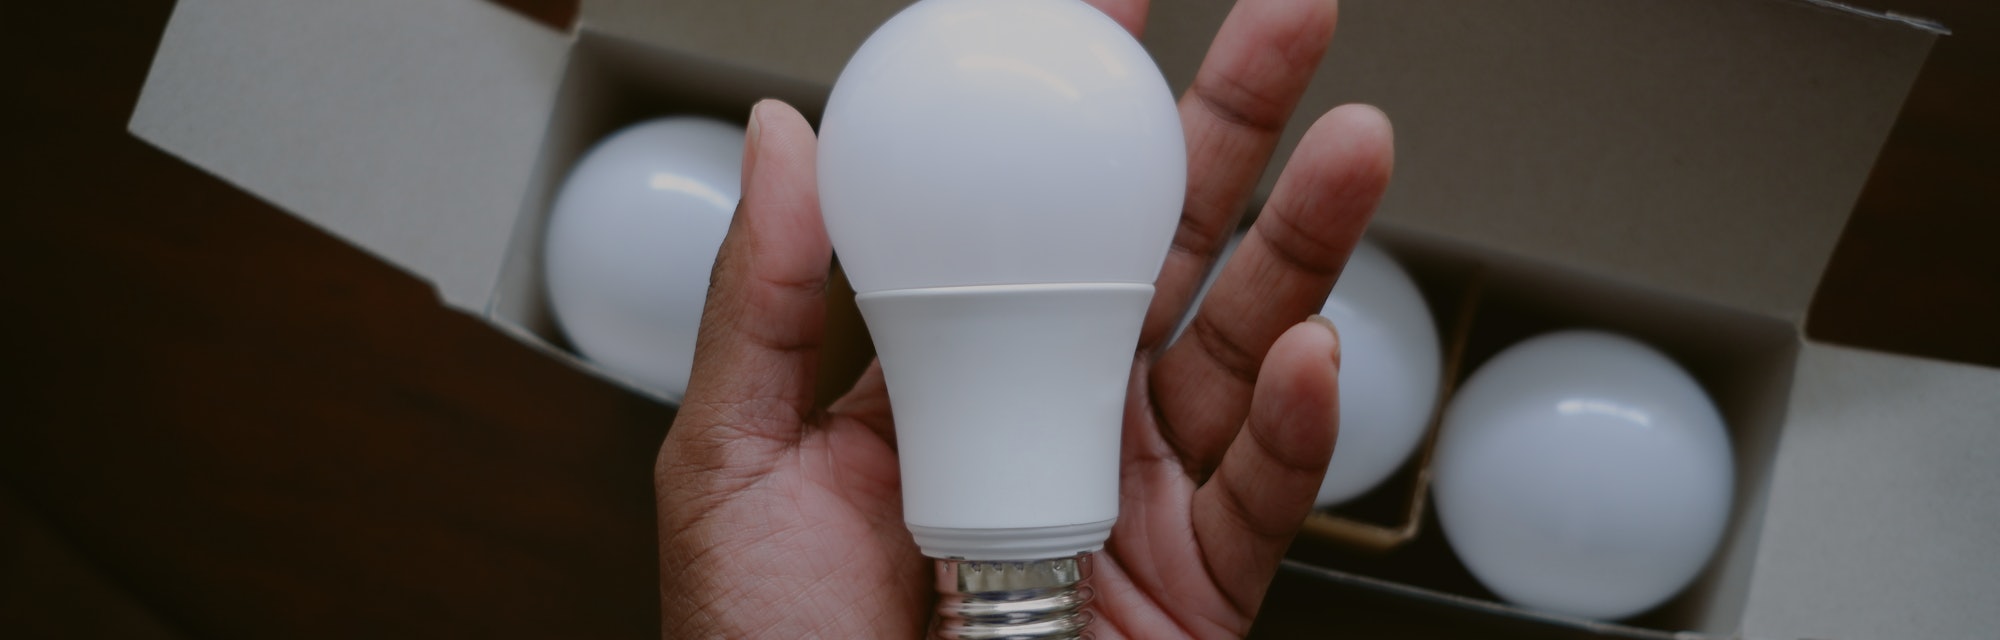 High angle view of unrecognizable black woman holding new LED light bulb